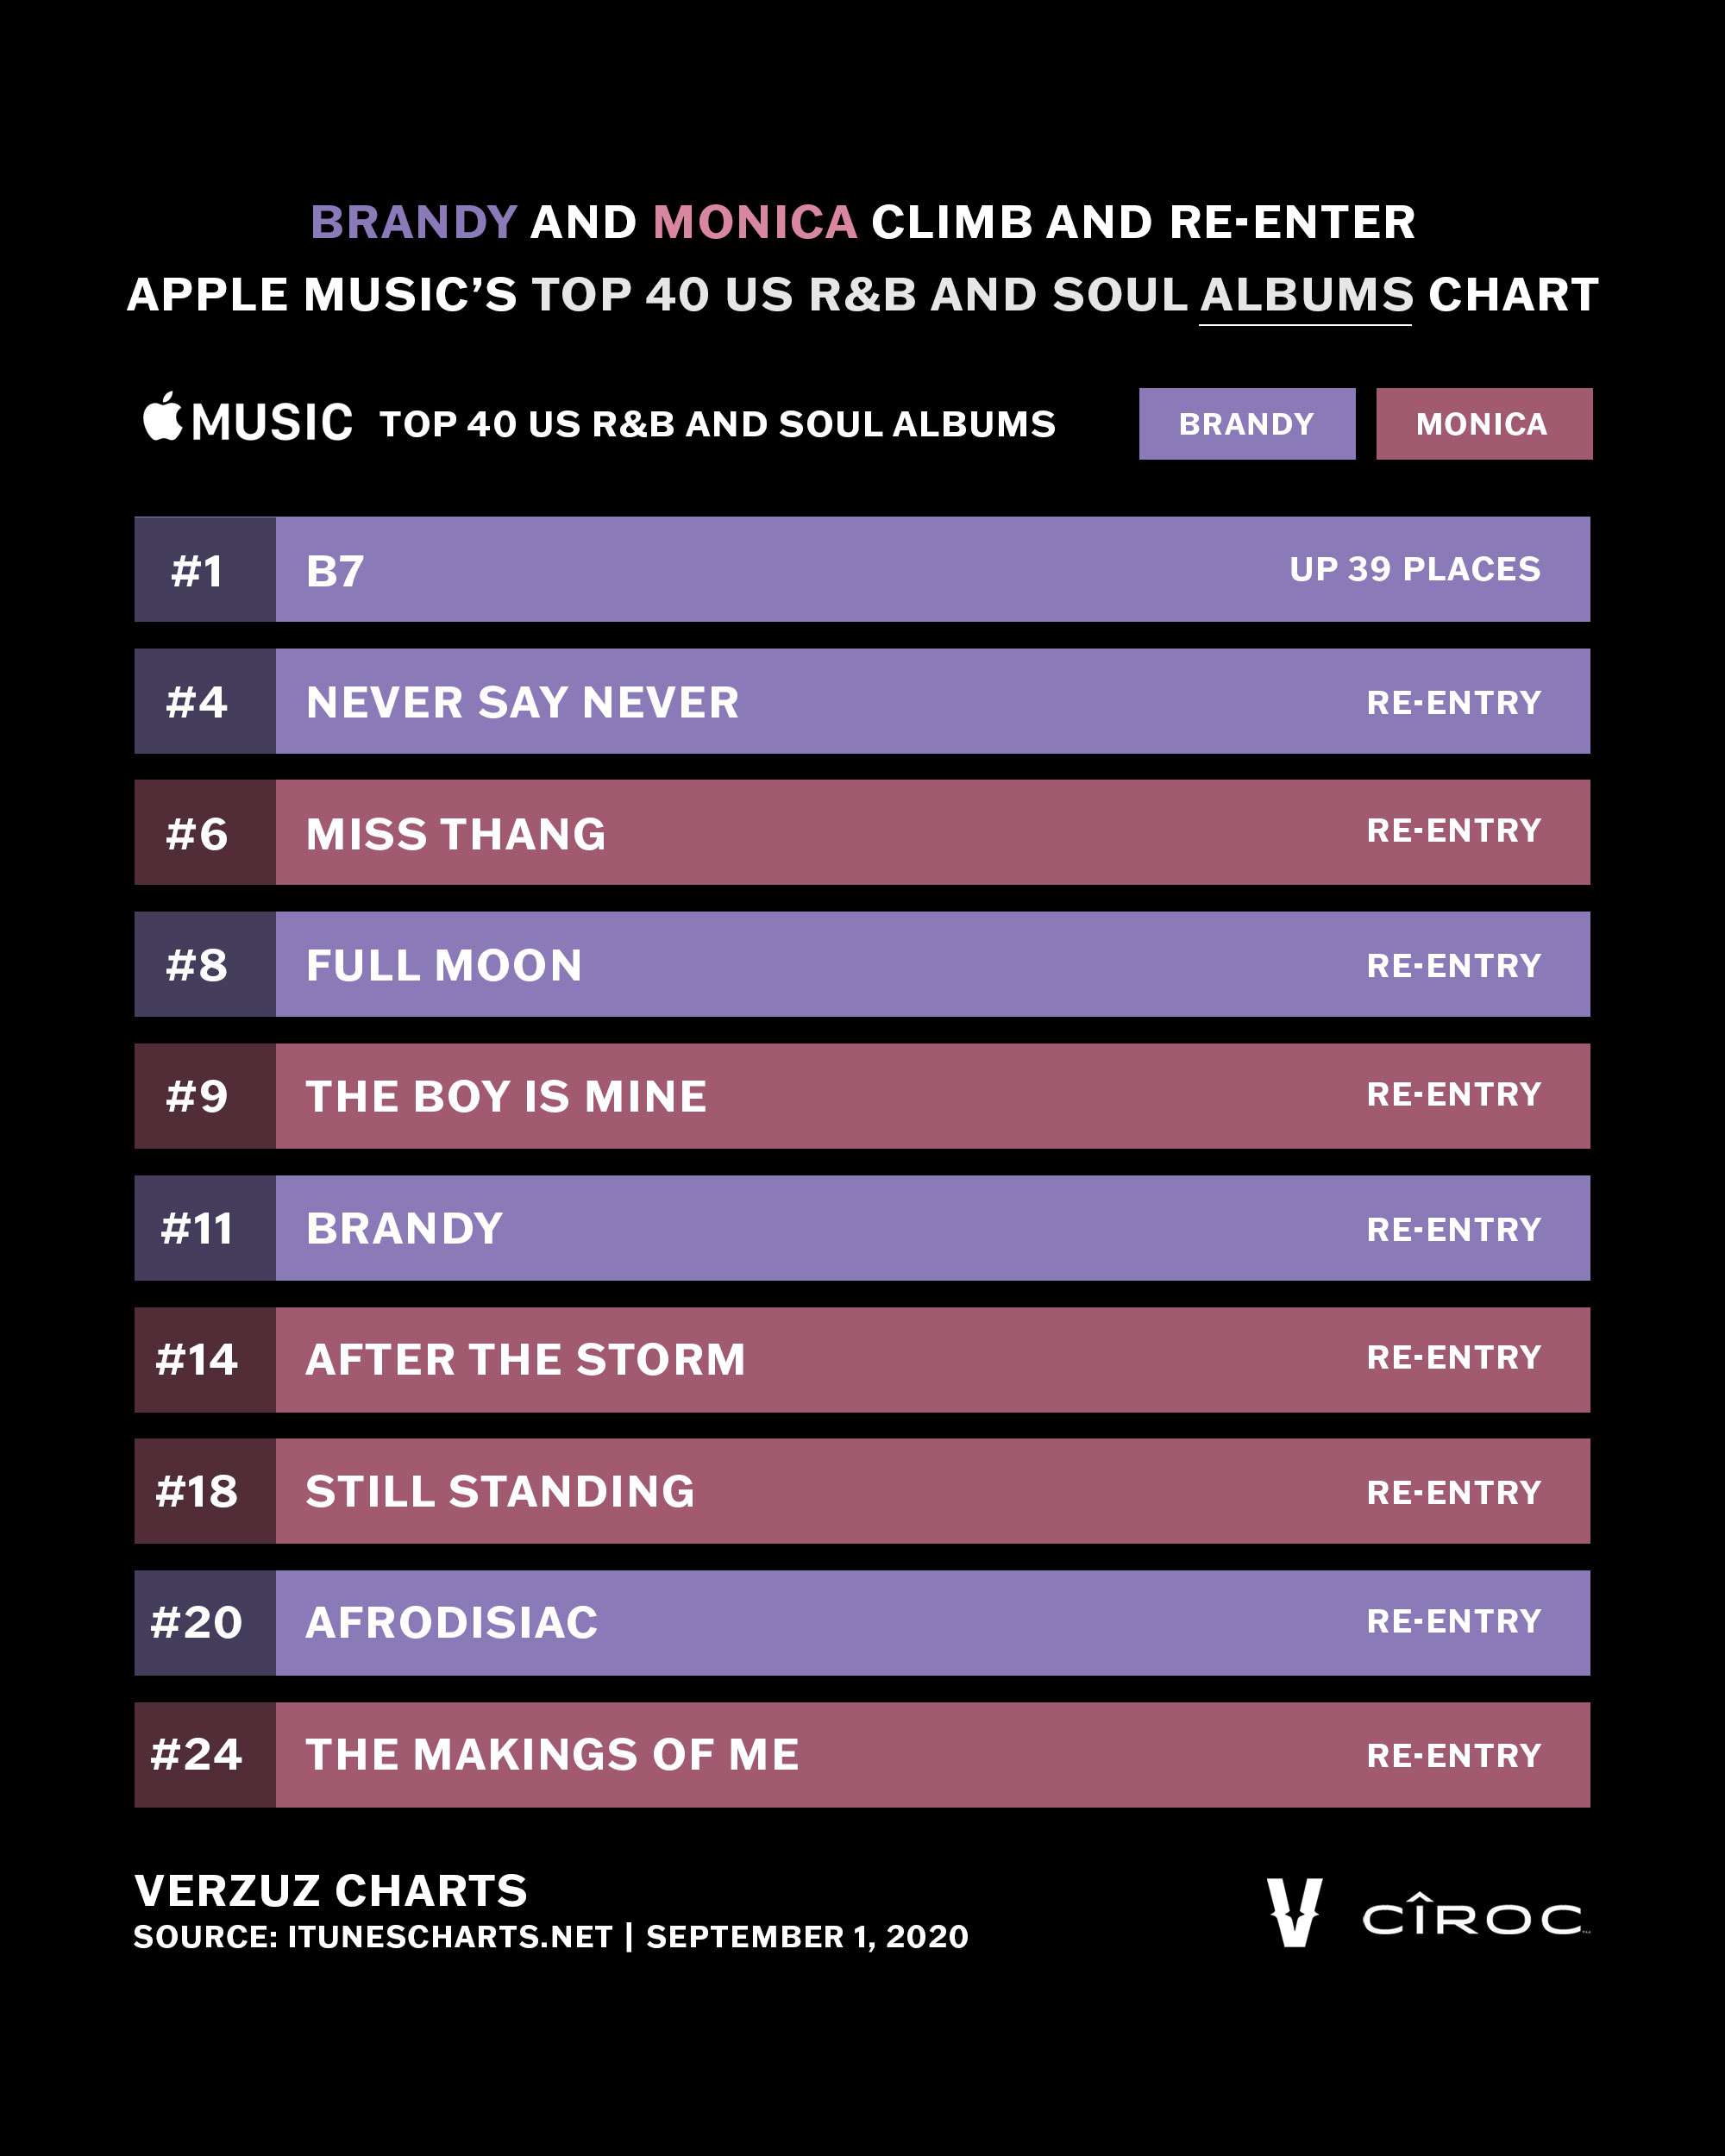 Pind automat At øge VERZUZ TV on Twitter: "The #VERZUZ Effect in REAL-TIME Post-Verzuz battle,  Brandy's album "B7" climbed to #1 along with her and Monica's albums  re-entering Apple Music's "Top 40 R&amp;B &amp; Soul Albums"